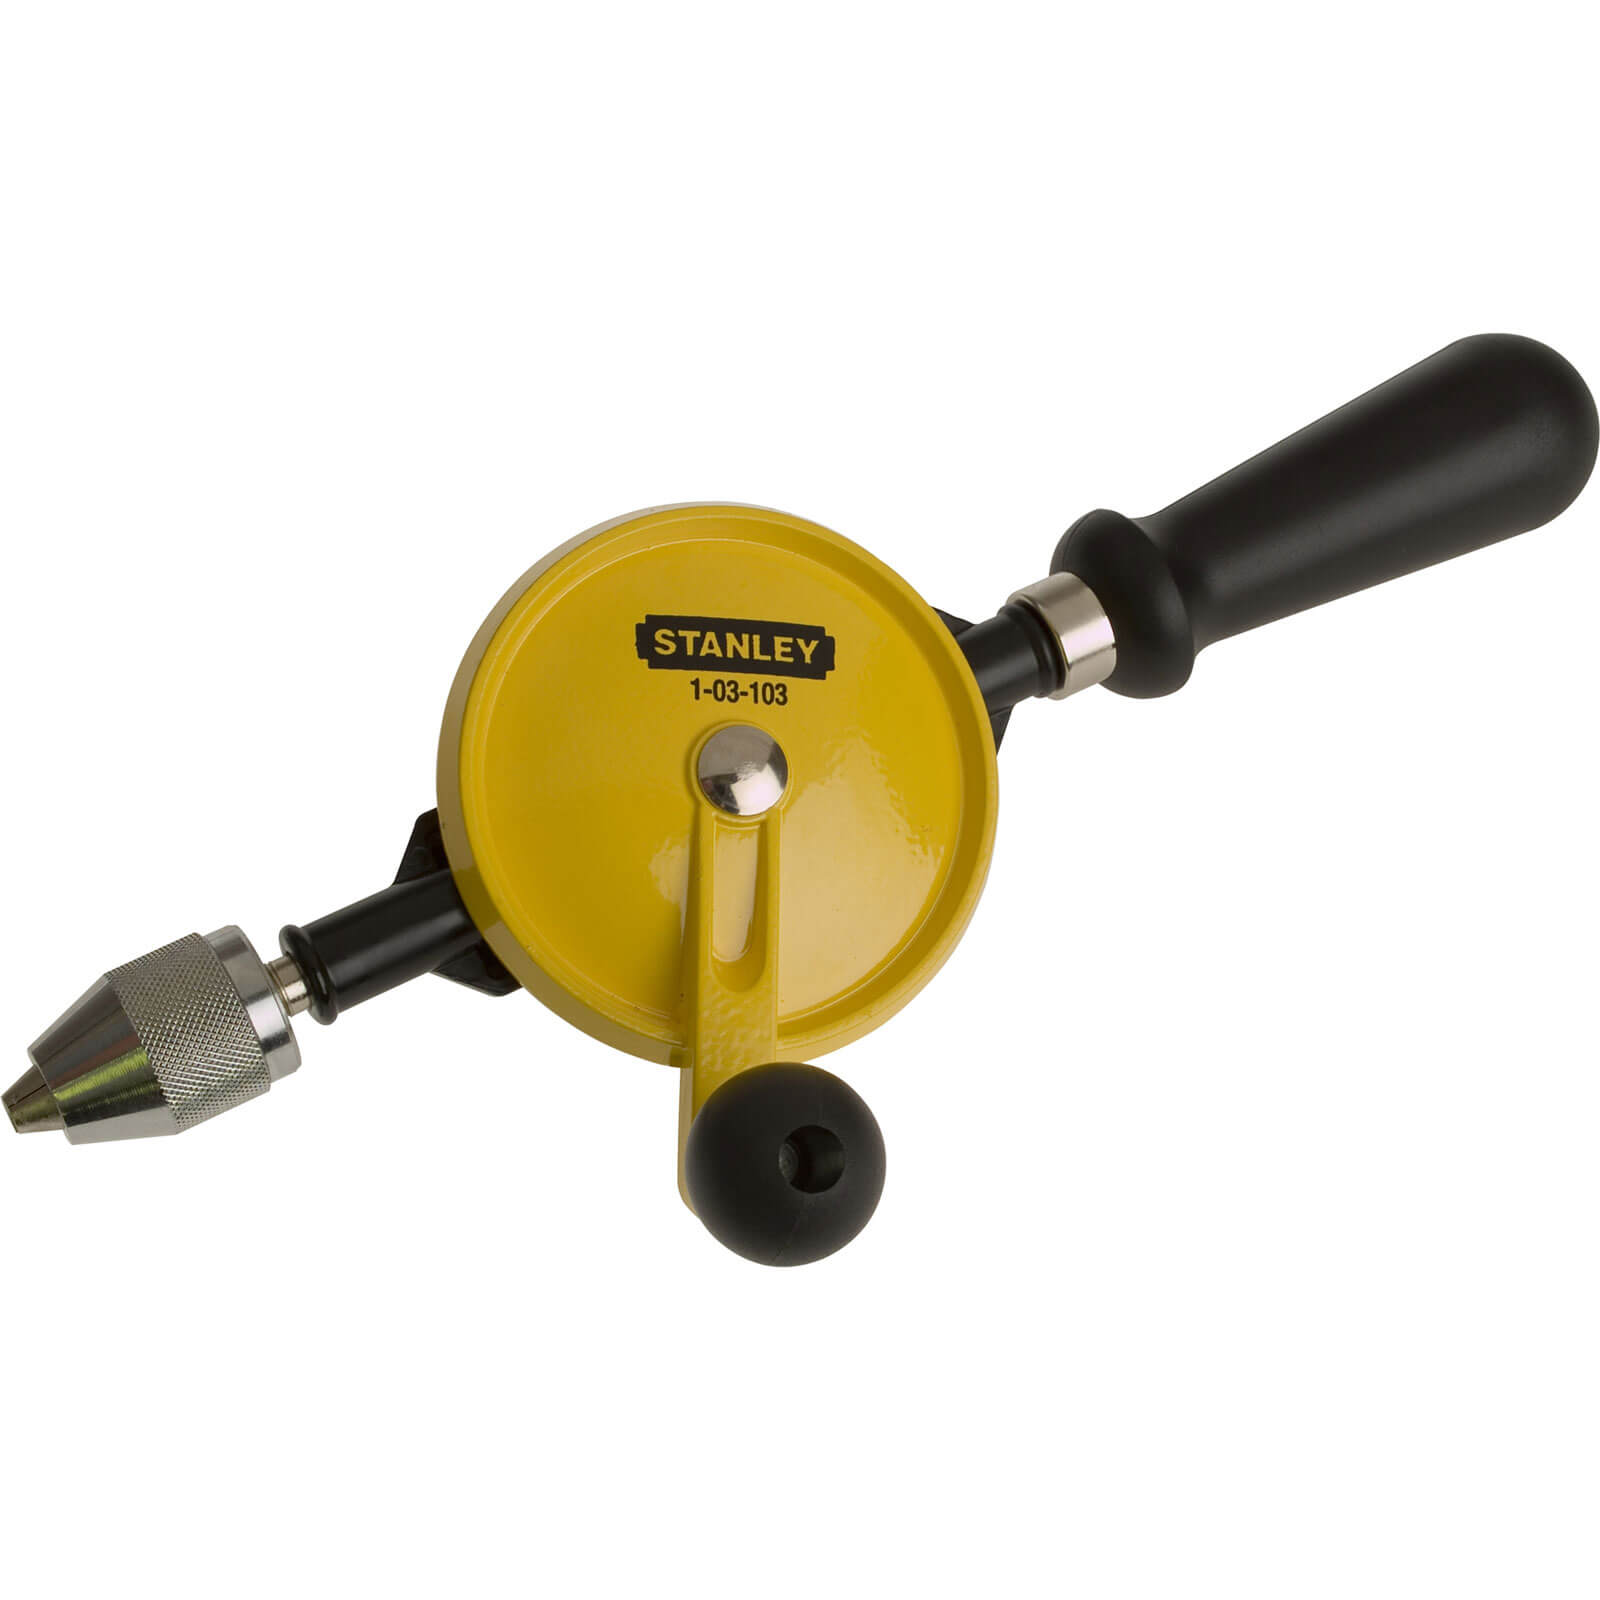 Stanley Double Pinion Hand Drill